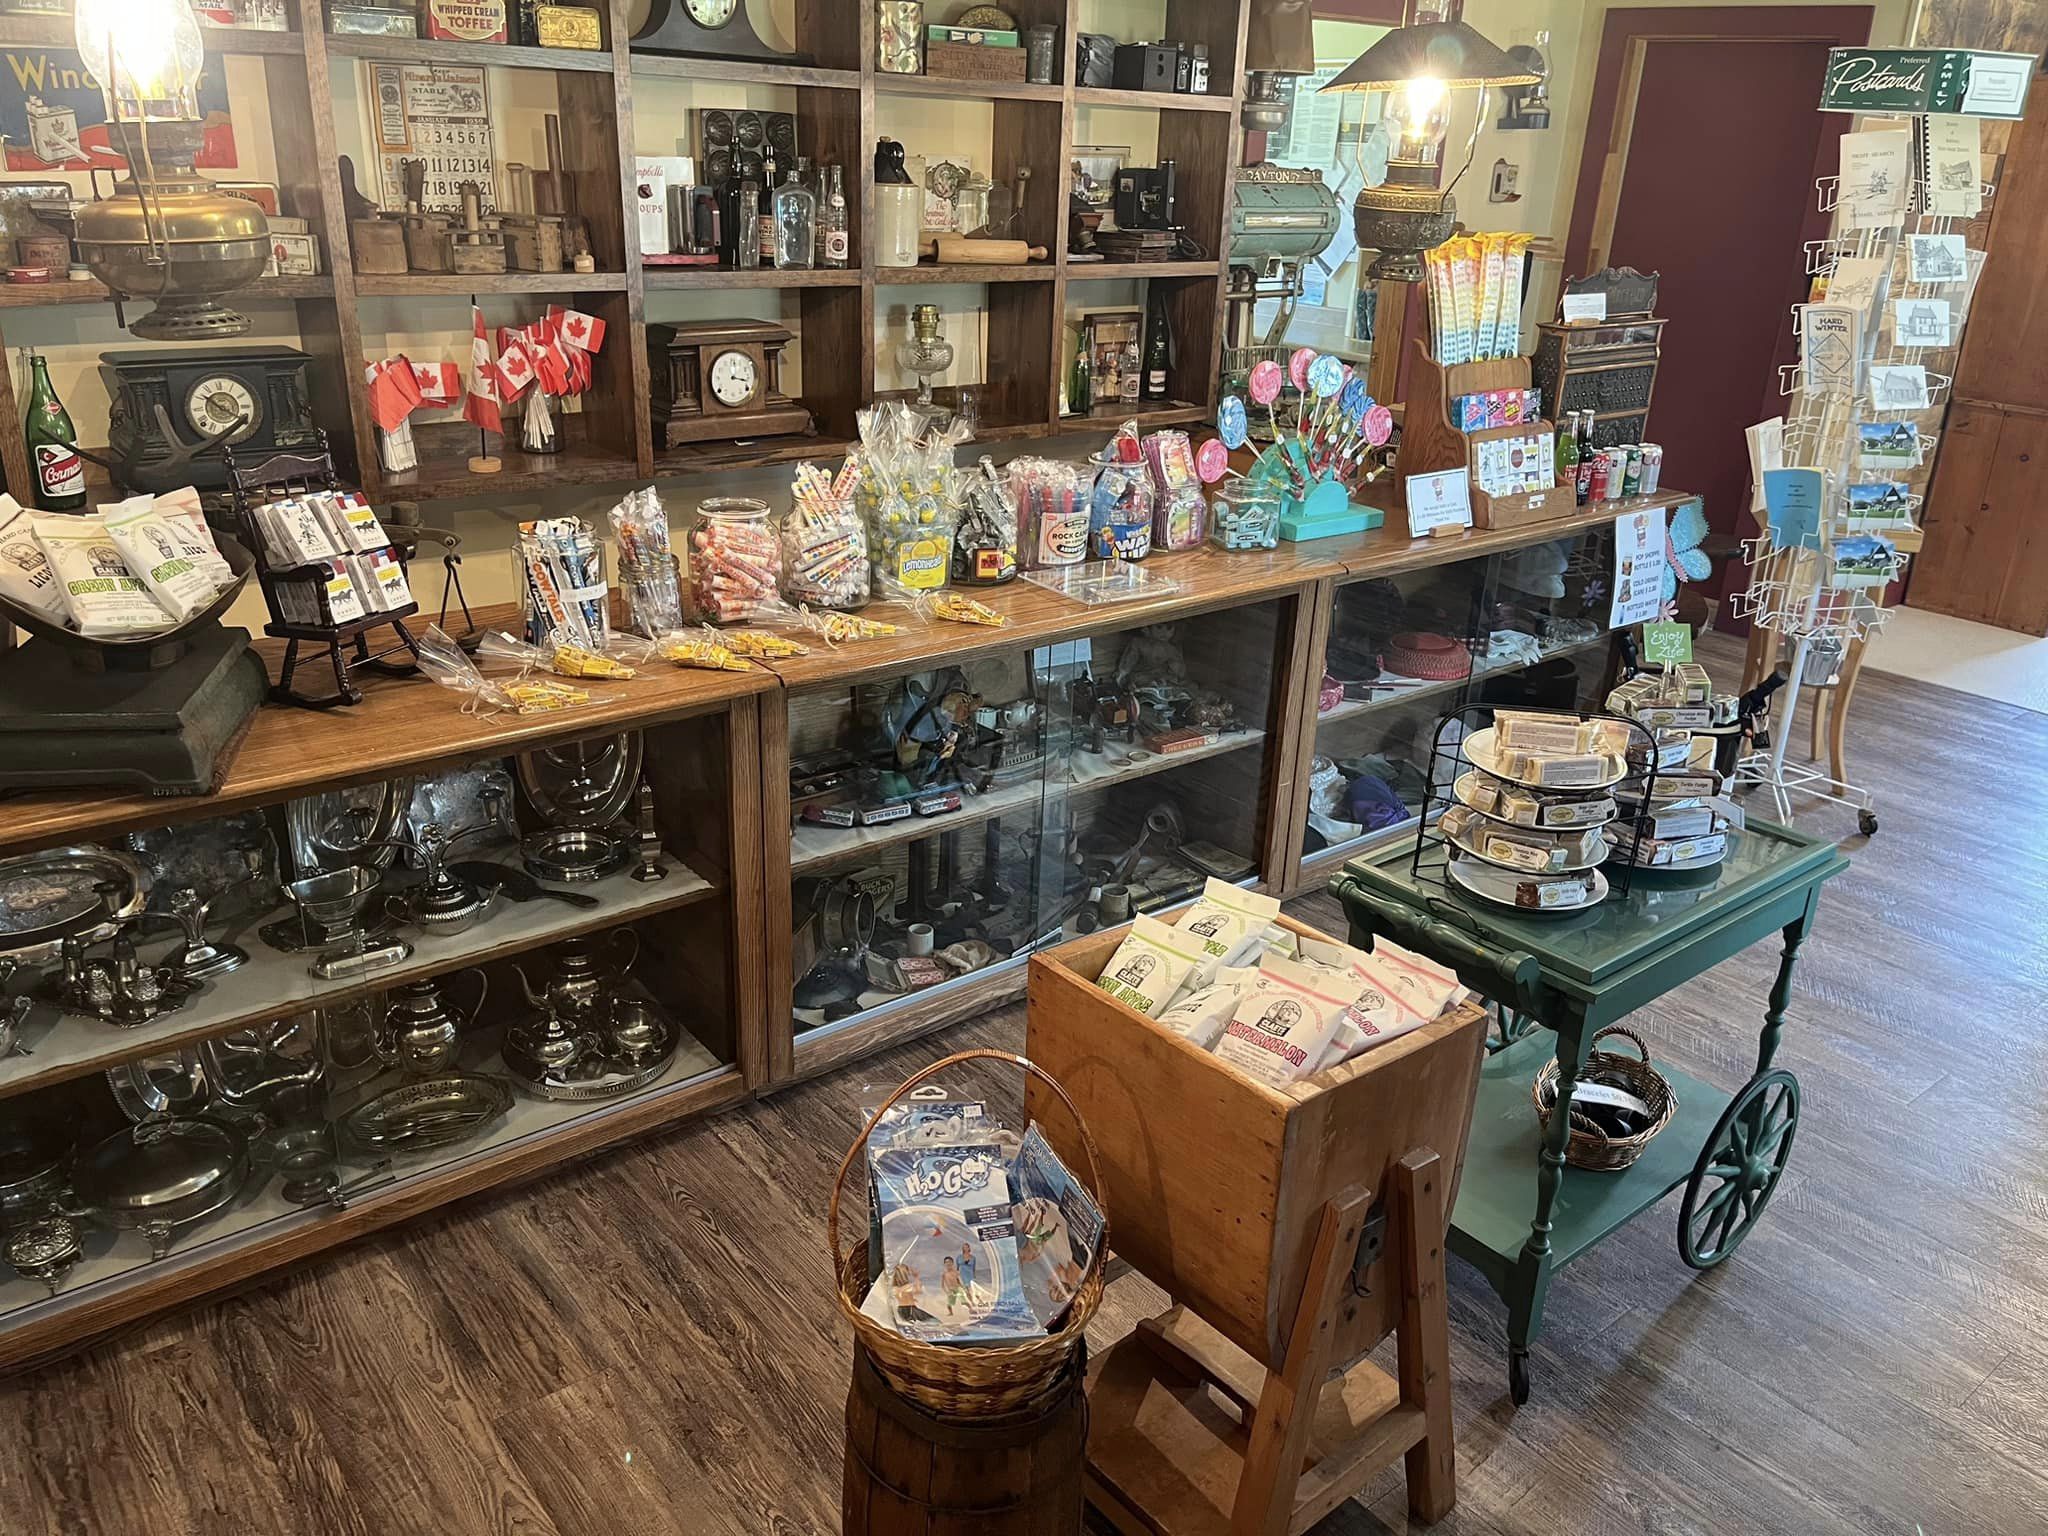 The interior of the Candy Shoppe at the Nipissing Township Museum; a well-stocked candy store decorated with antique jars, shelves and a wooden shop counter.